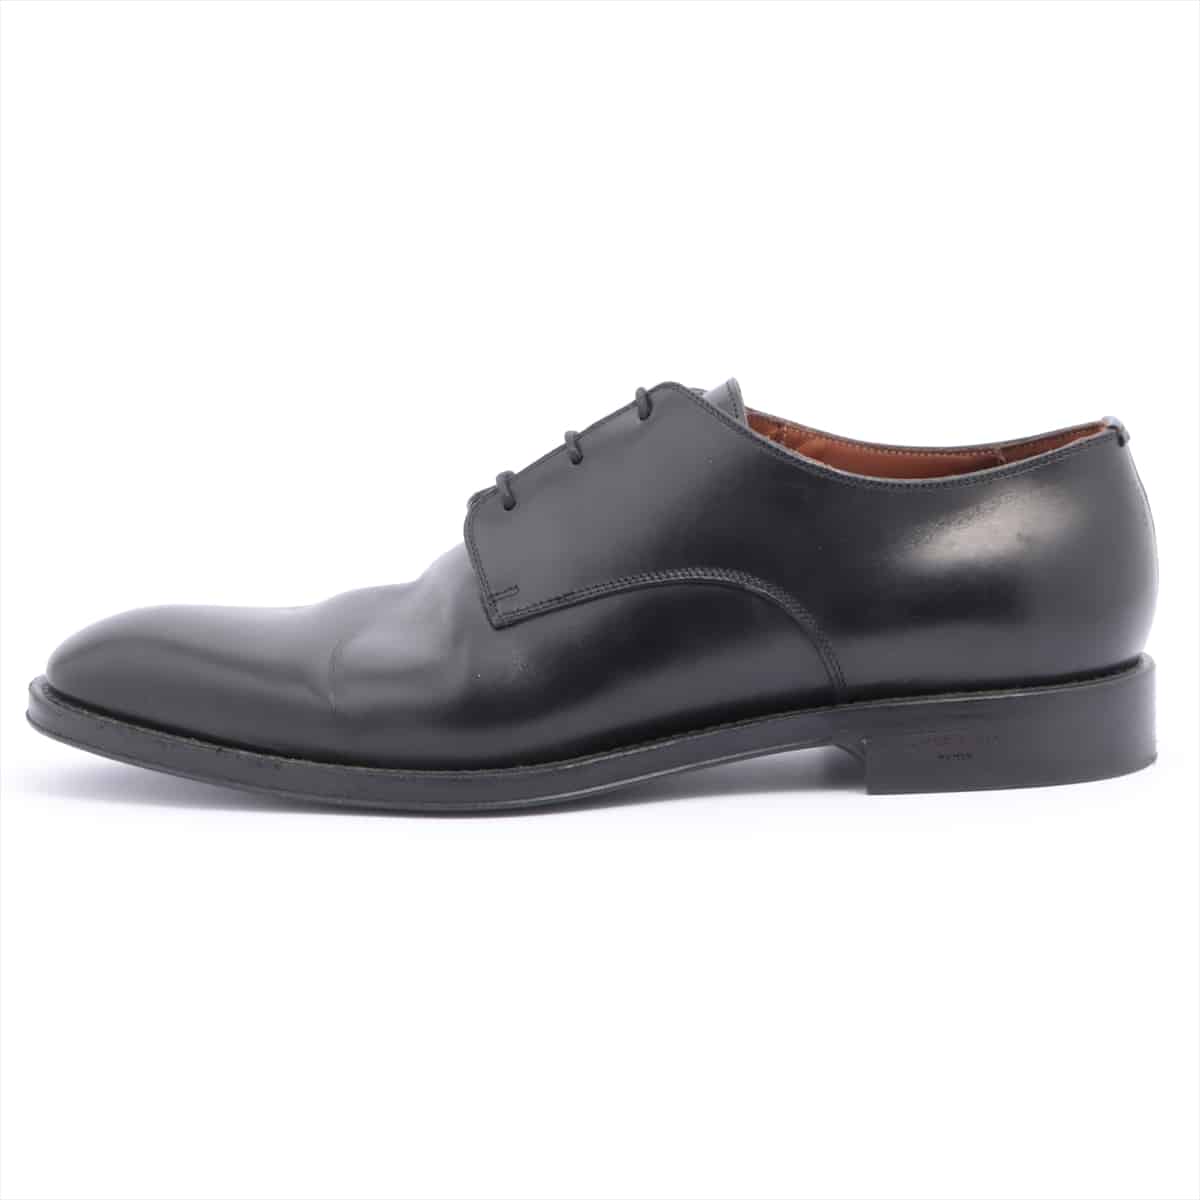 Givenchy Leather Leather shoes 41 Men's Black